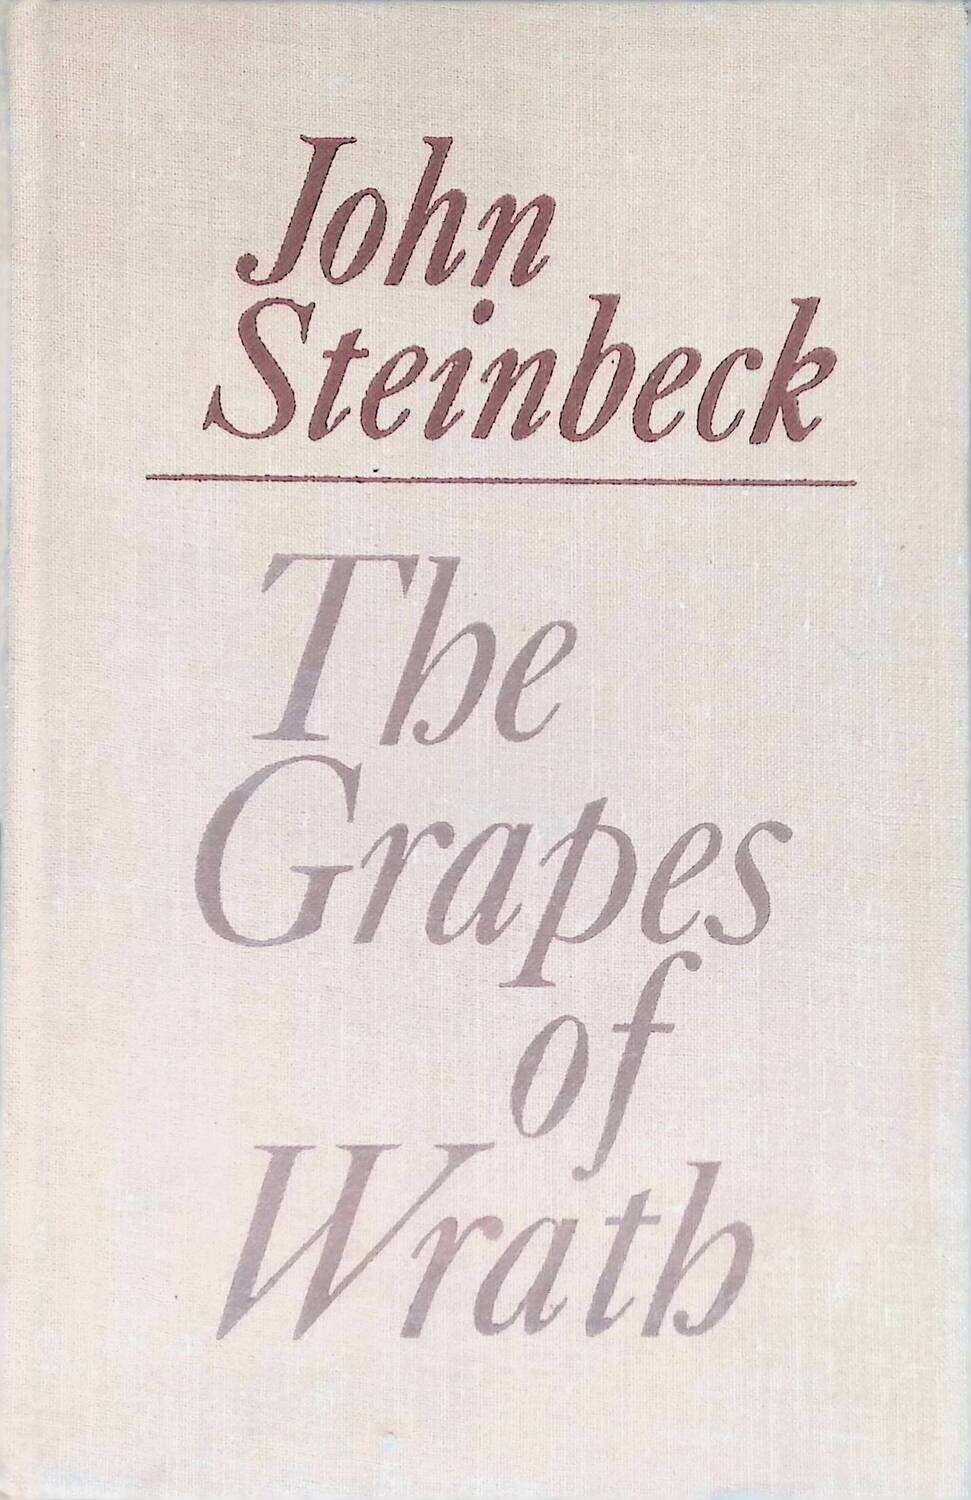 The Grapes of Wrath; John Steinbeck